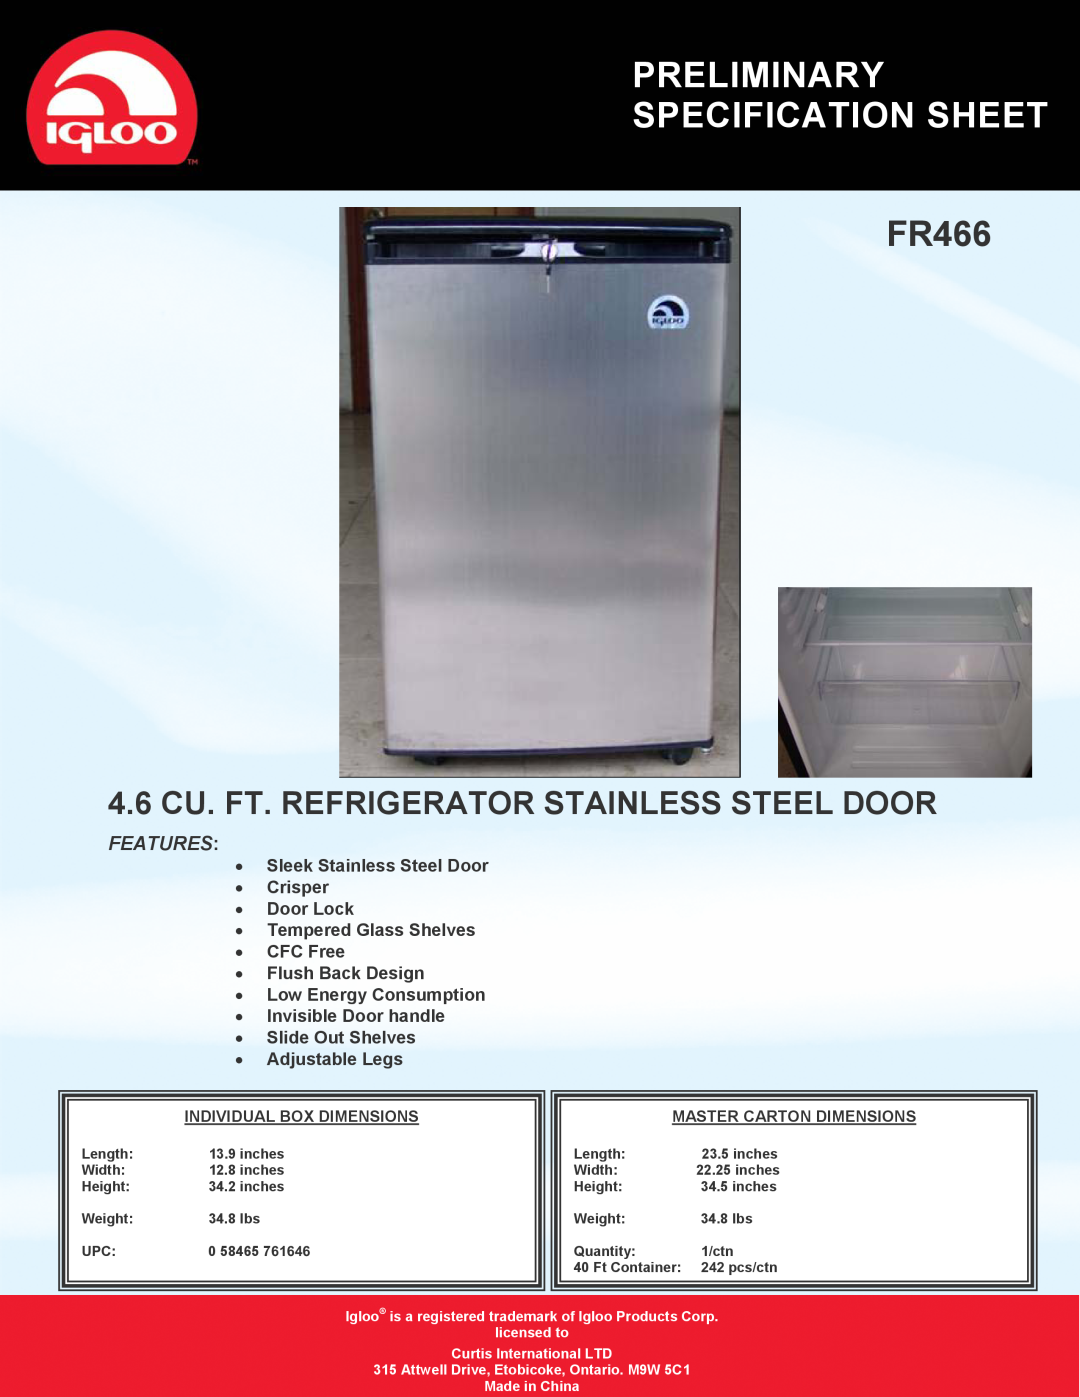 Igloo FR466 specifications Preliminary Specification Sheet, 4.6 CU. FT. REFRIGERATOR STAINLESS STEEL DOOR, Features 